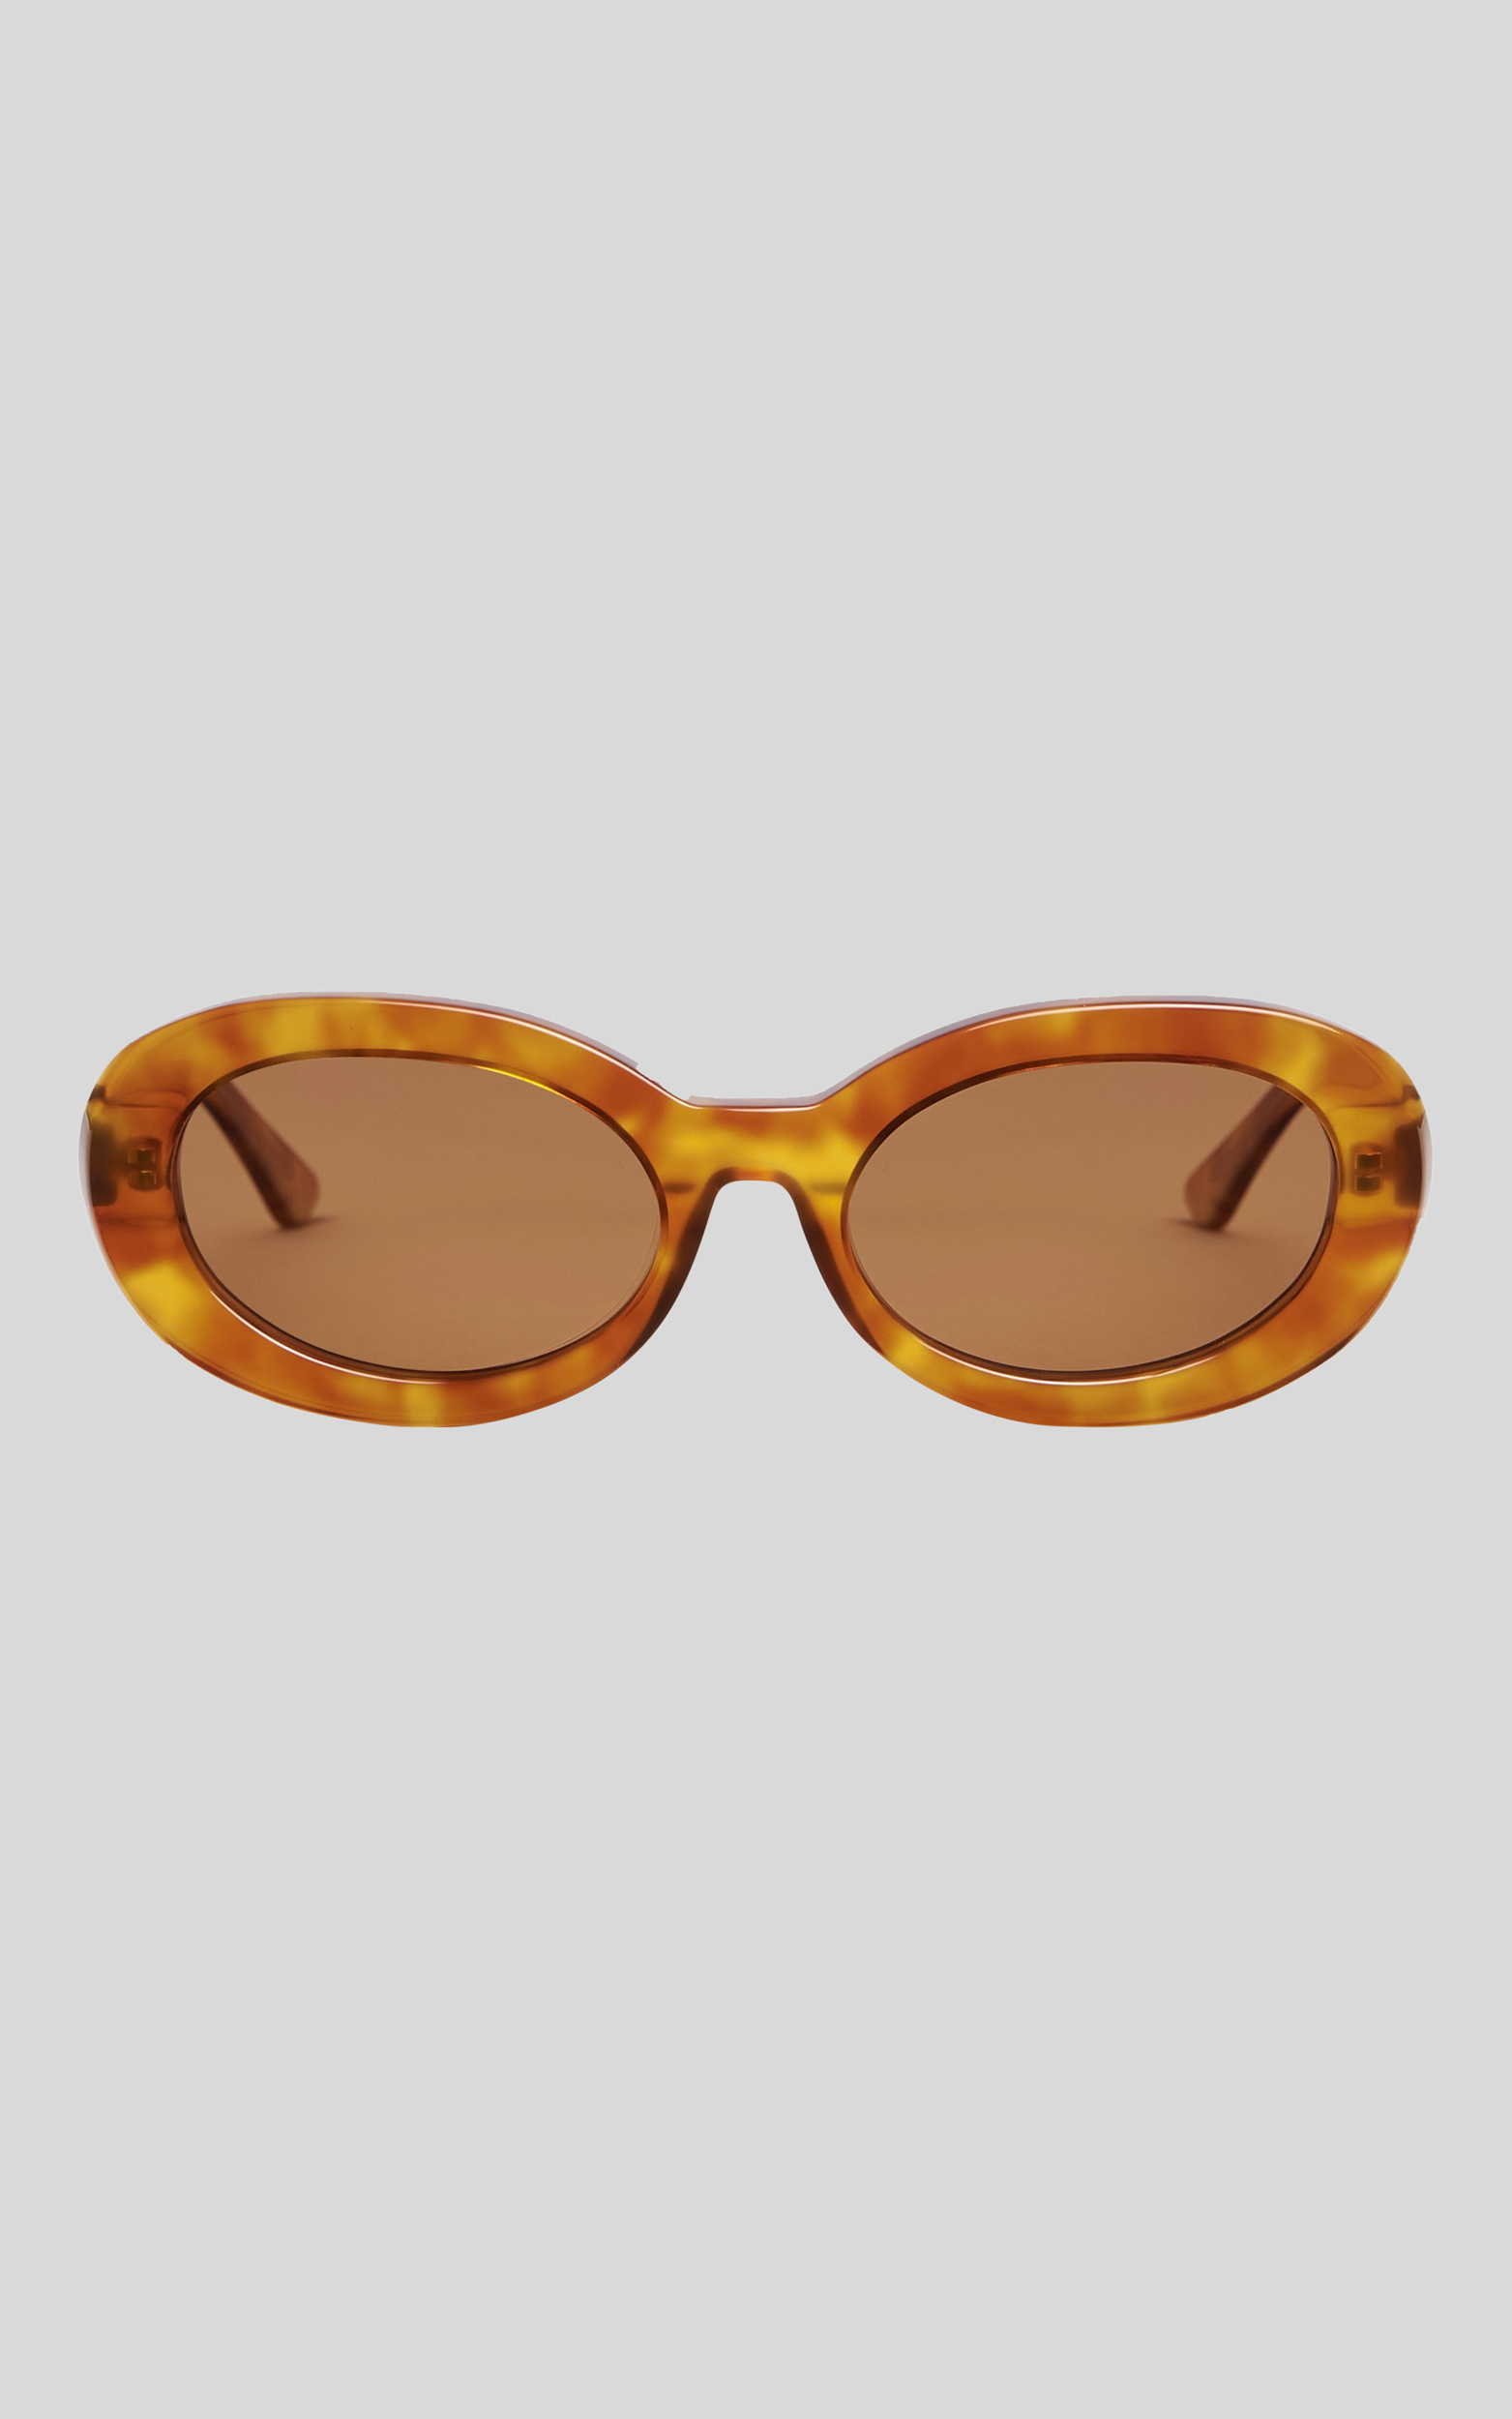 Banbe Eyewear - The Lily in Honey Tort Brown - NoSize, BRN1, hi-res image number null